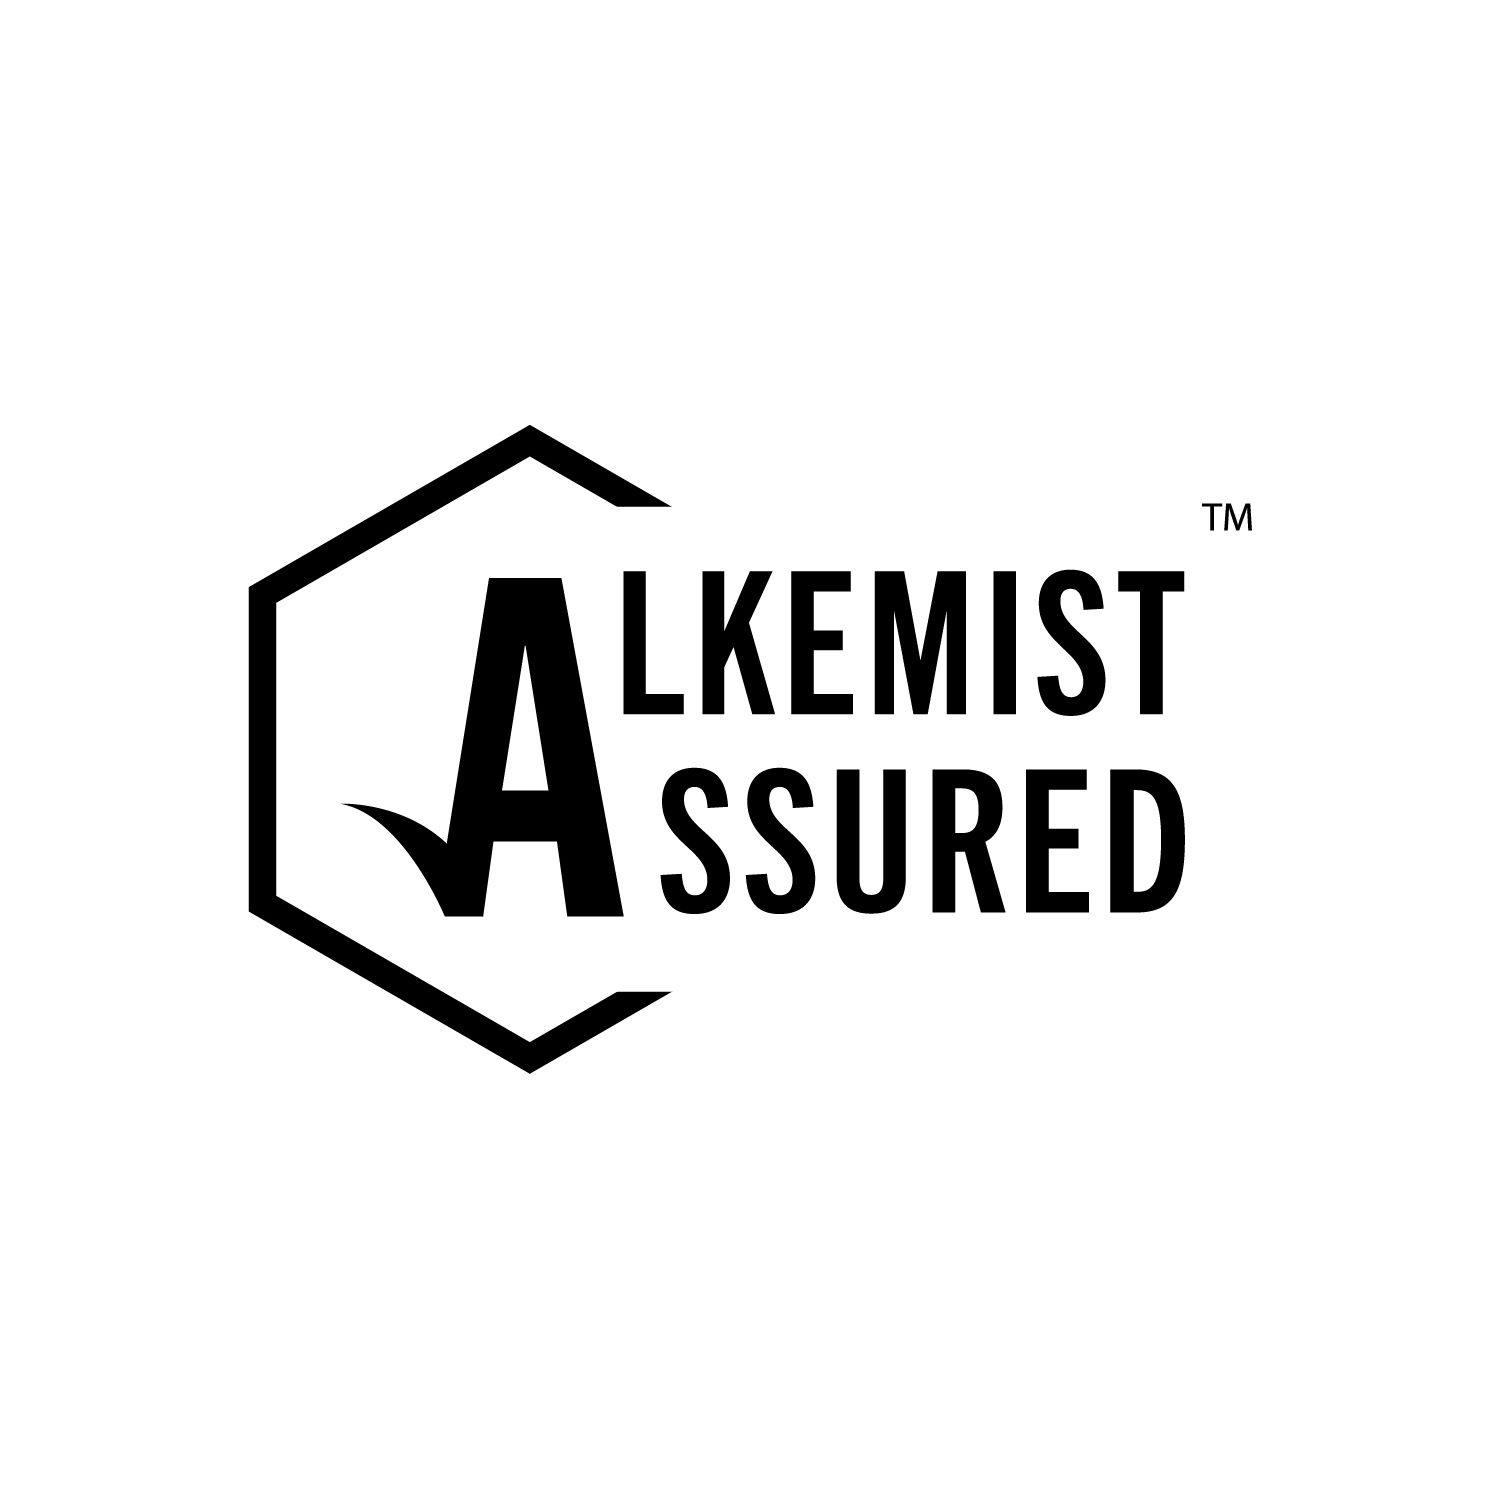 Four Verdure Sciences ingredients now qualified to use Alkemist Assured quality-testing seal